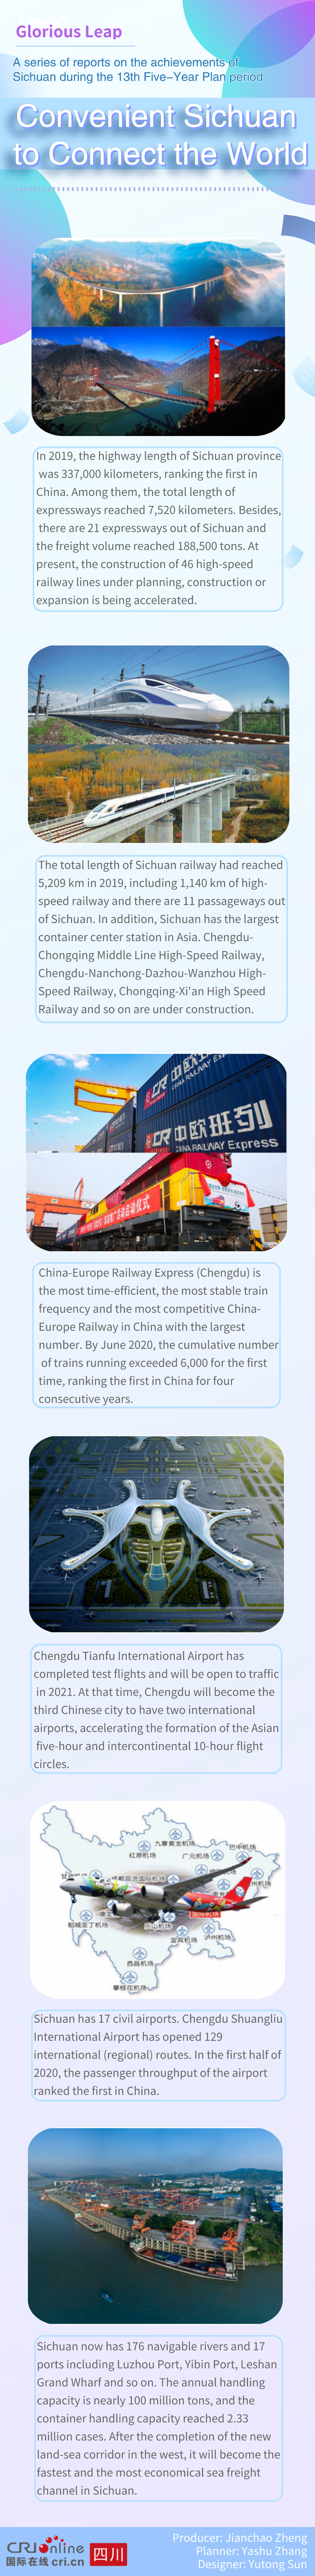 Glorious Leap-A Series of Reports on the Achievements of Sichuan During the 13th Five-Year Plan Period: Transportation